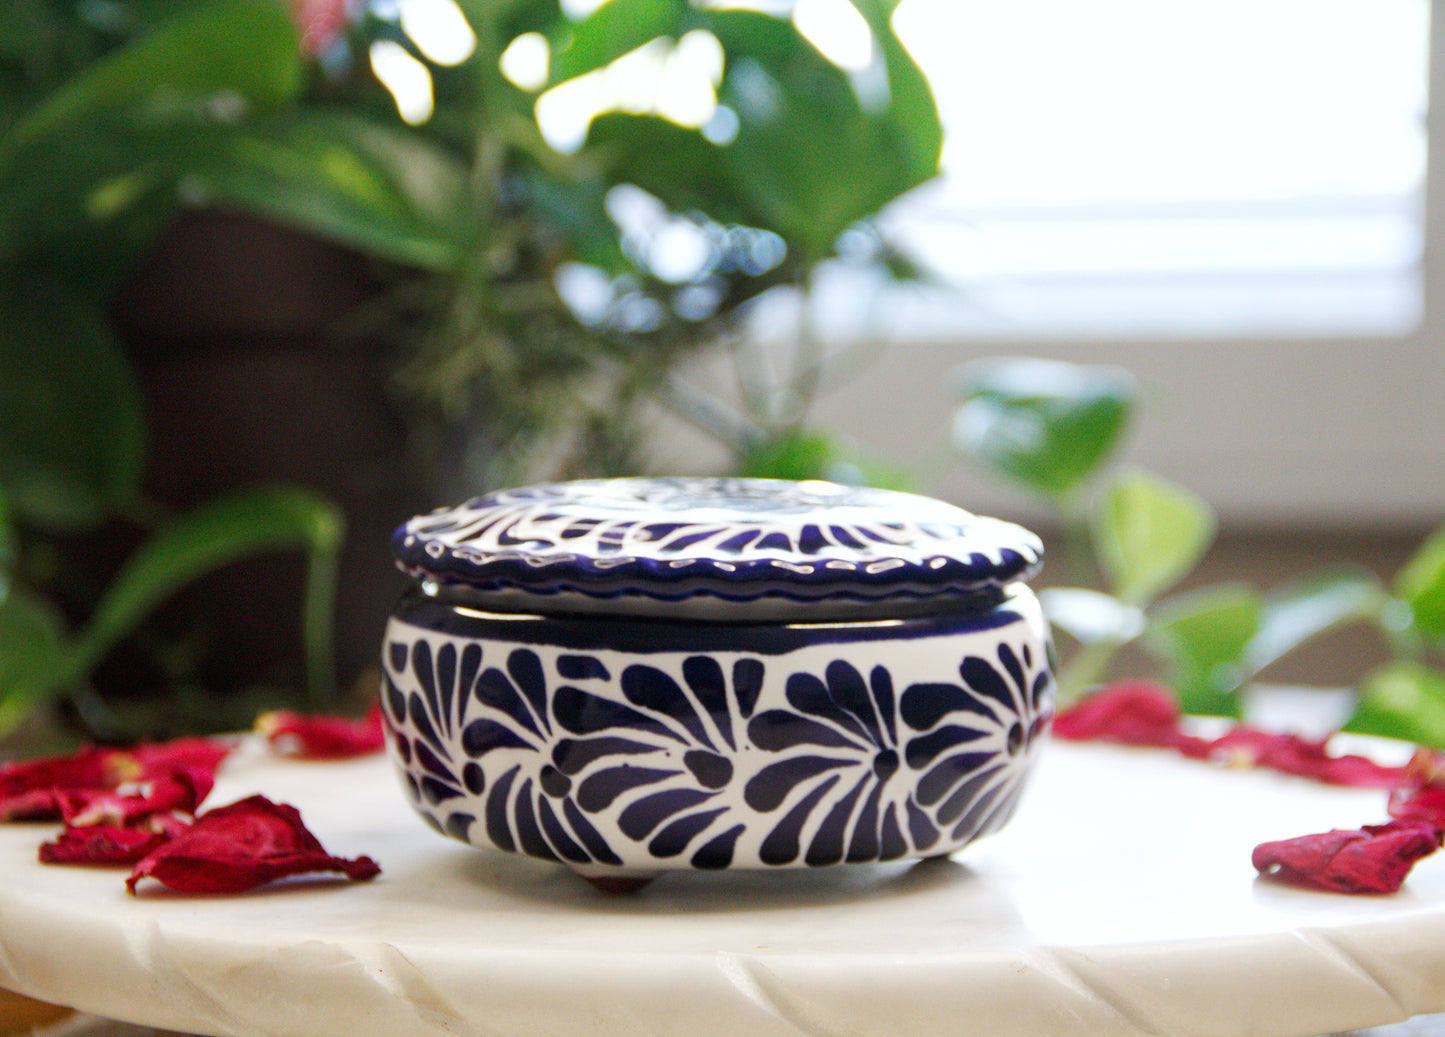 Front view of the Artisanal candle in a beautiful closed lid talavera with hand made blue strokes design. Handcrafted by Artisan in Puebla, Mexico. 100% All Natural Soy Candle. Reuse the talavera as home decor or storage.